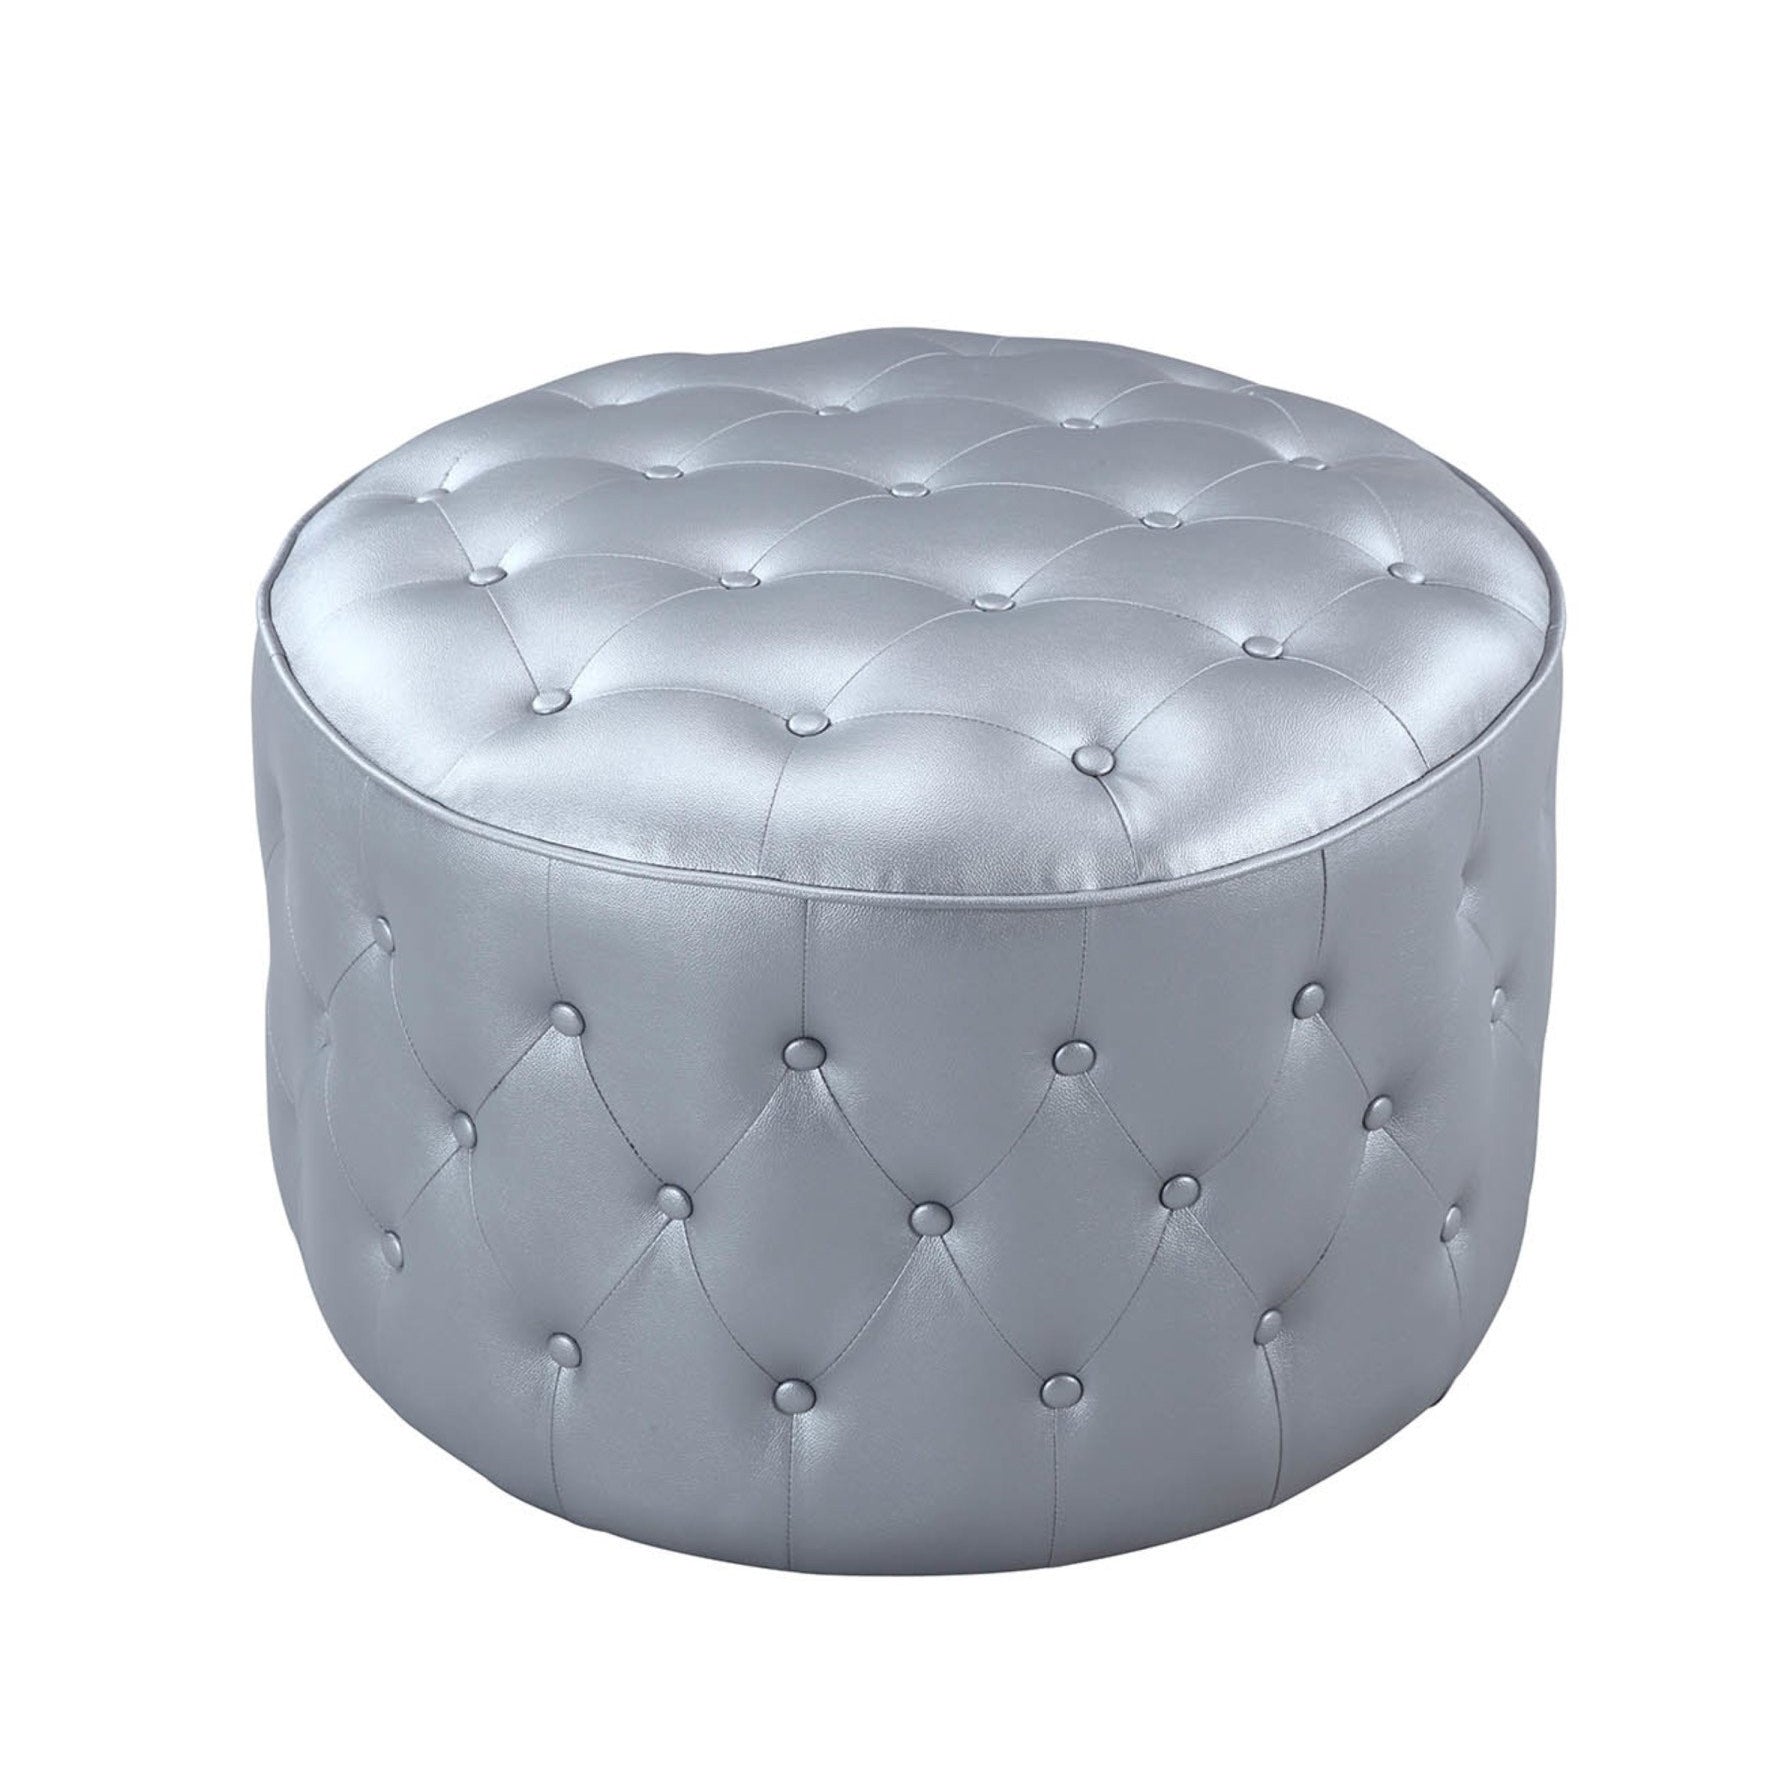 Tosh Tufted Faux Leather Round Ottoman Pouf